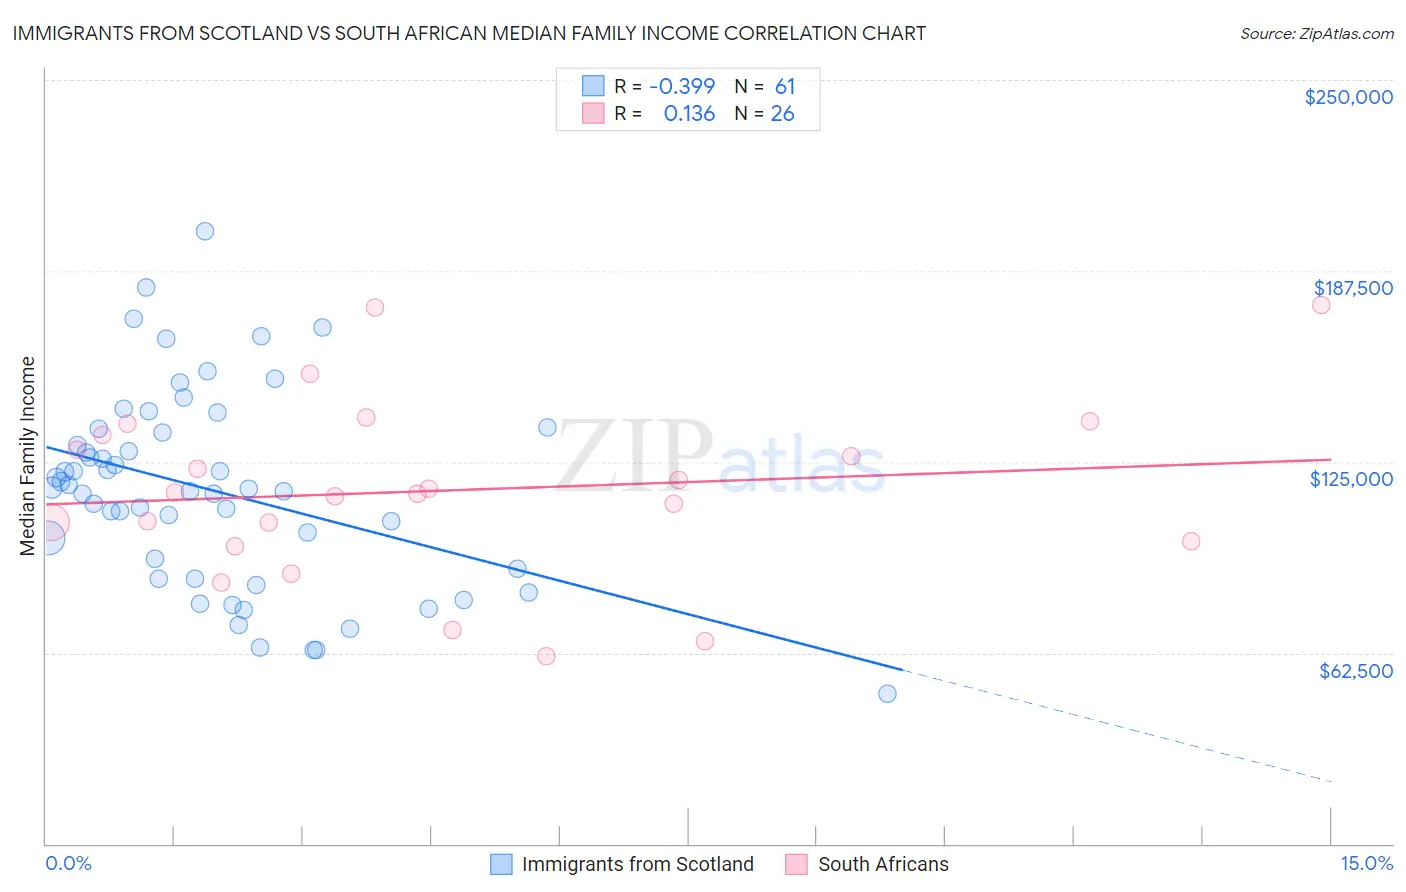 Immigrants from Scotland vs South African Median Family Income